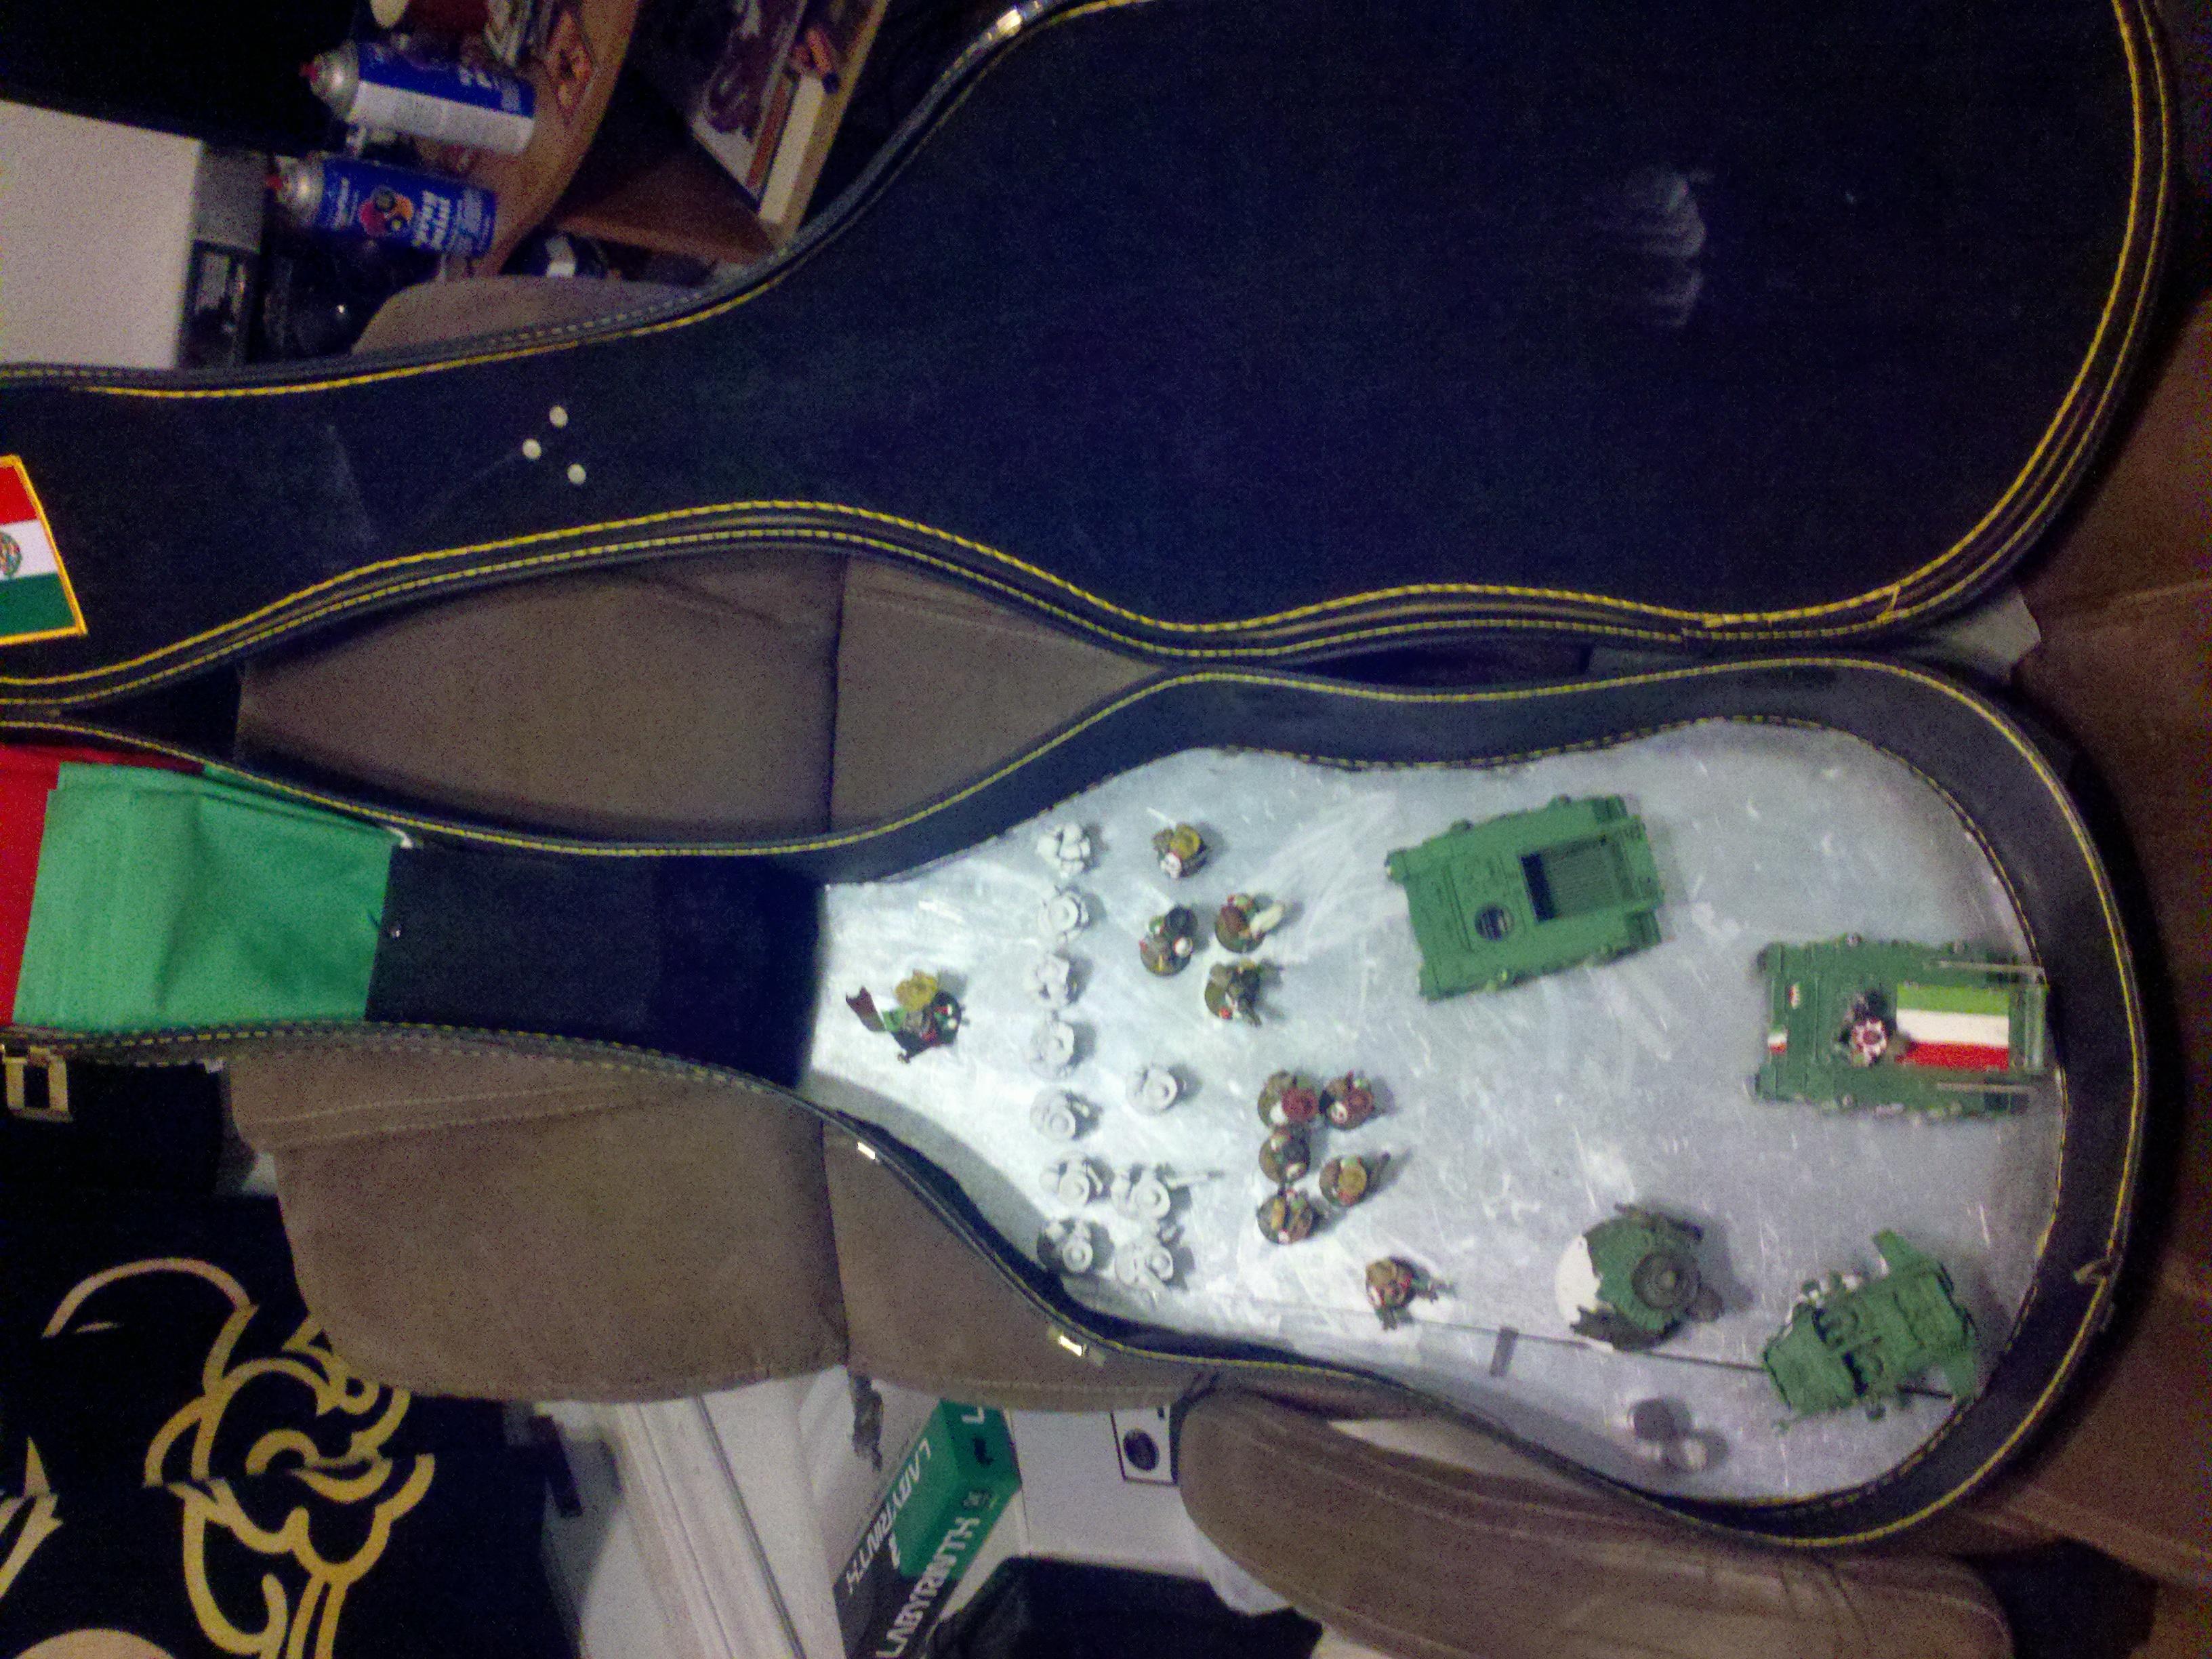 The guitar case in its early stages